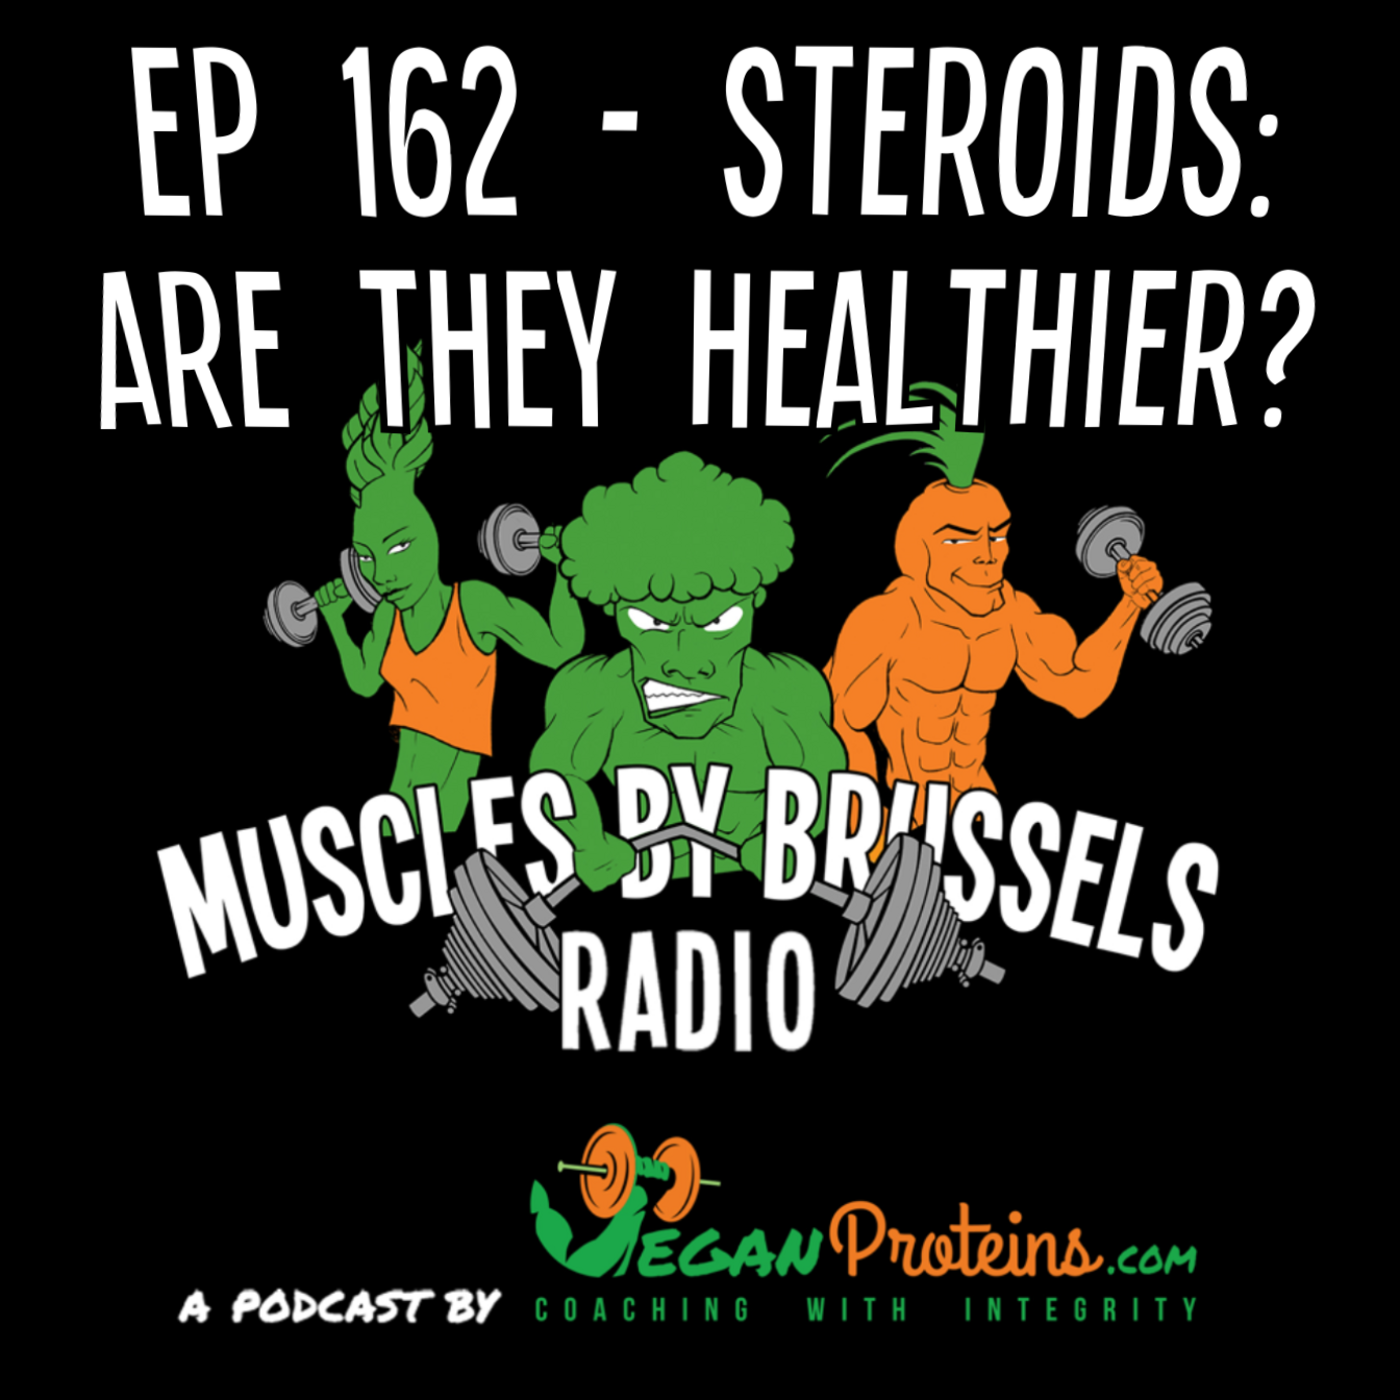 Ep 162 - Steroids: Are They Healthier?